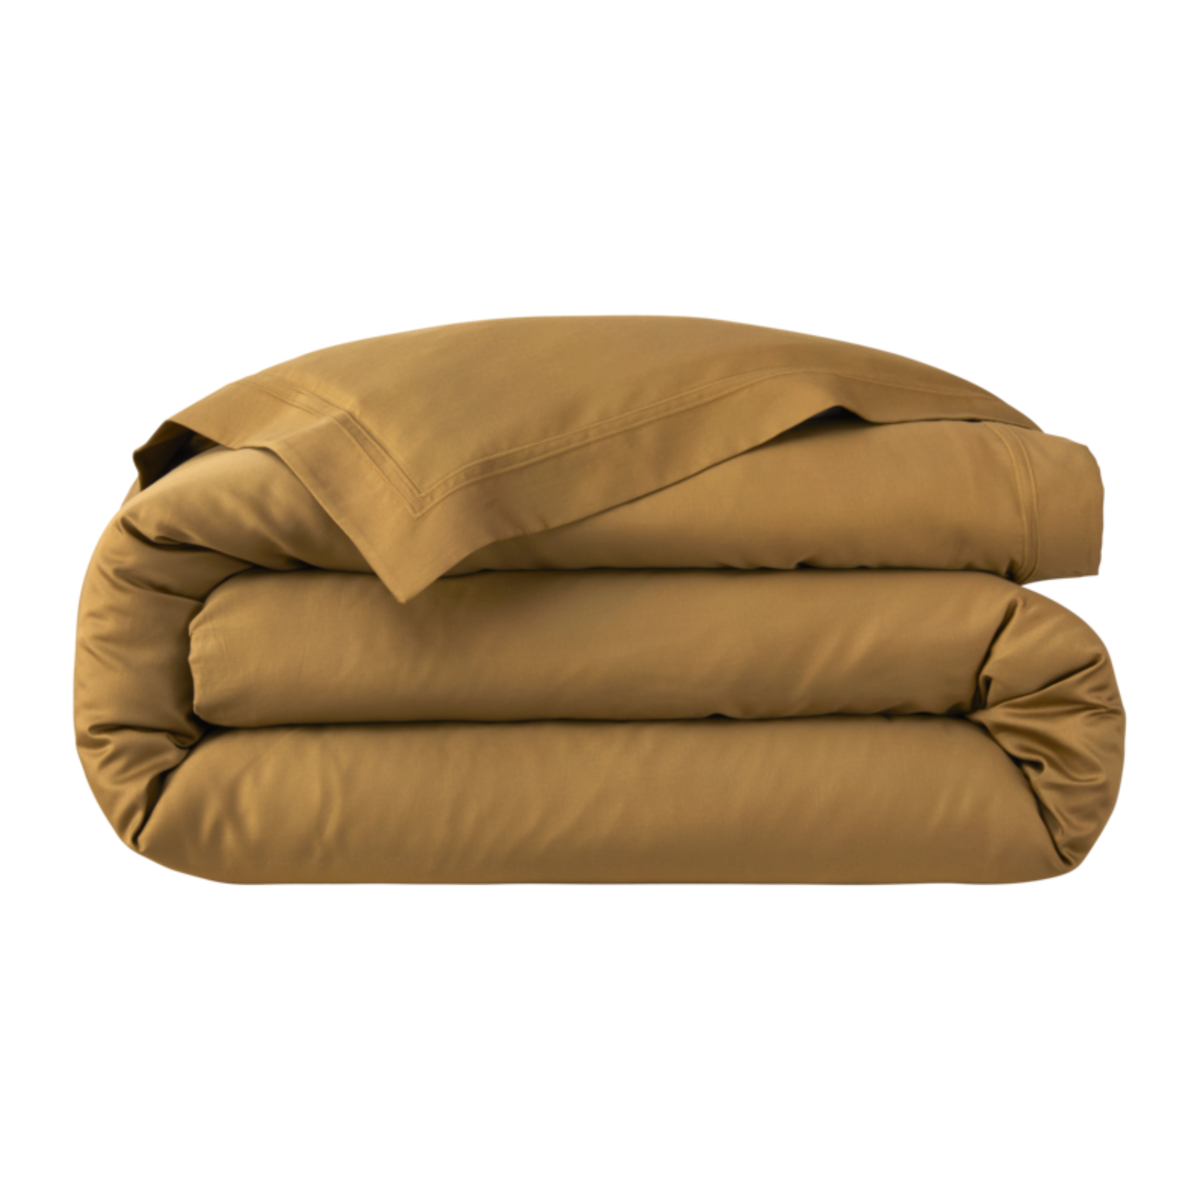 Folded Duvet Cover of Yves Delorme Triomphe Bedding in Bronze Color